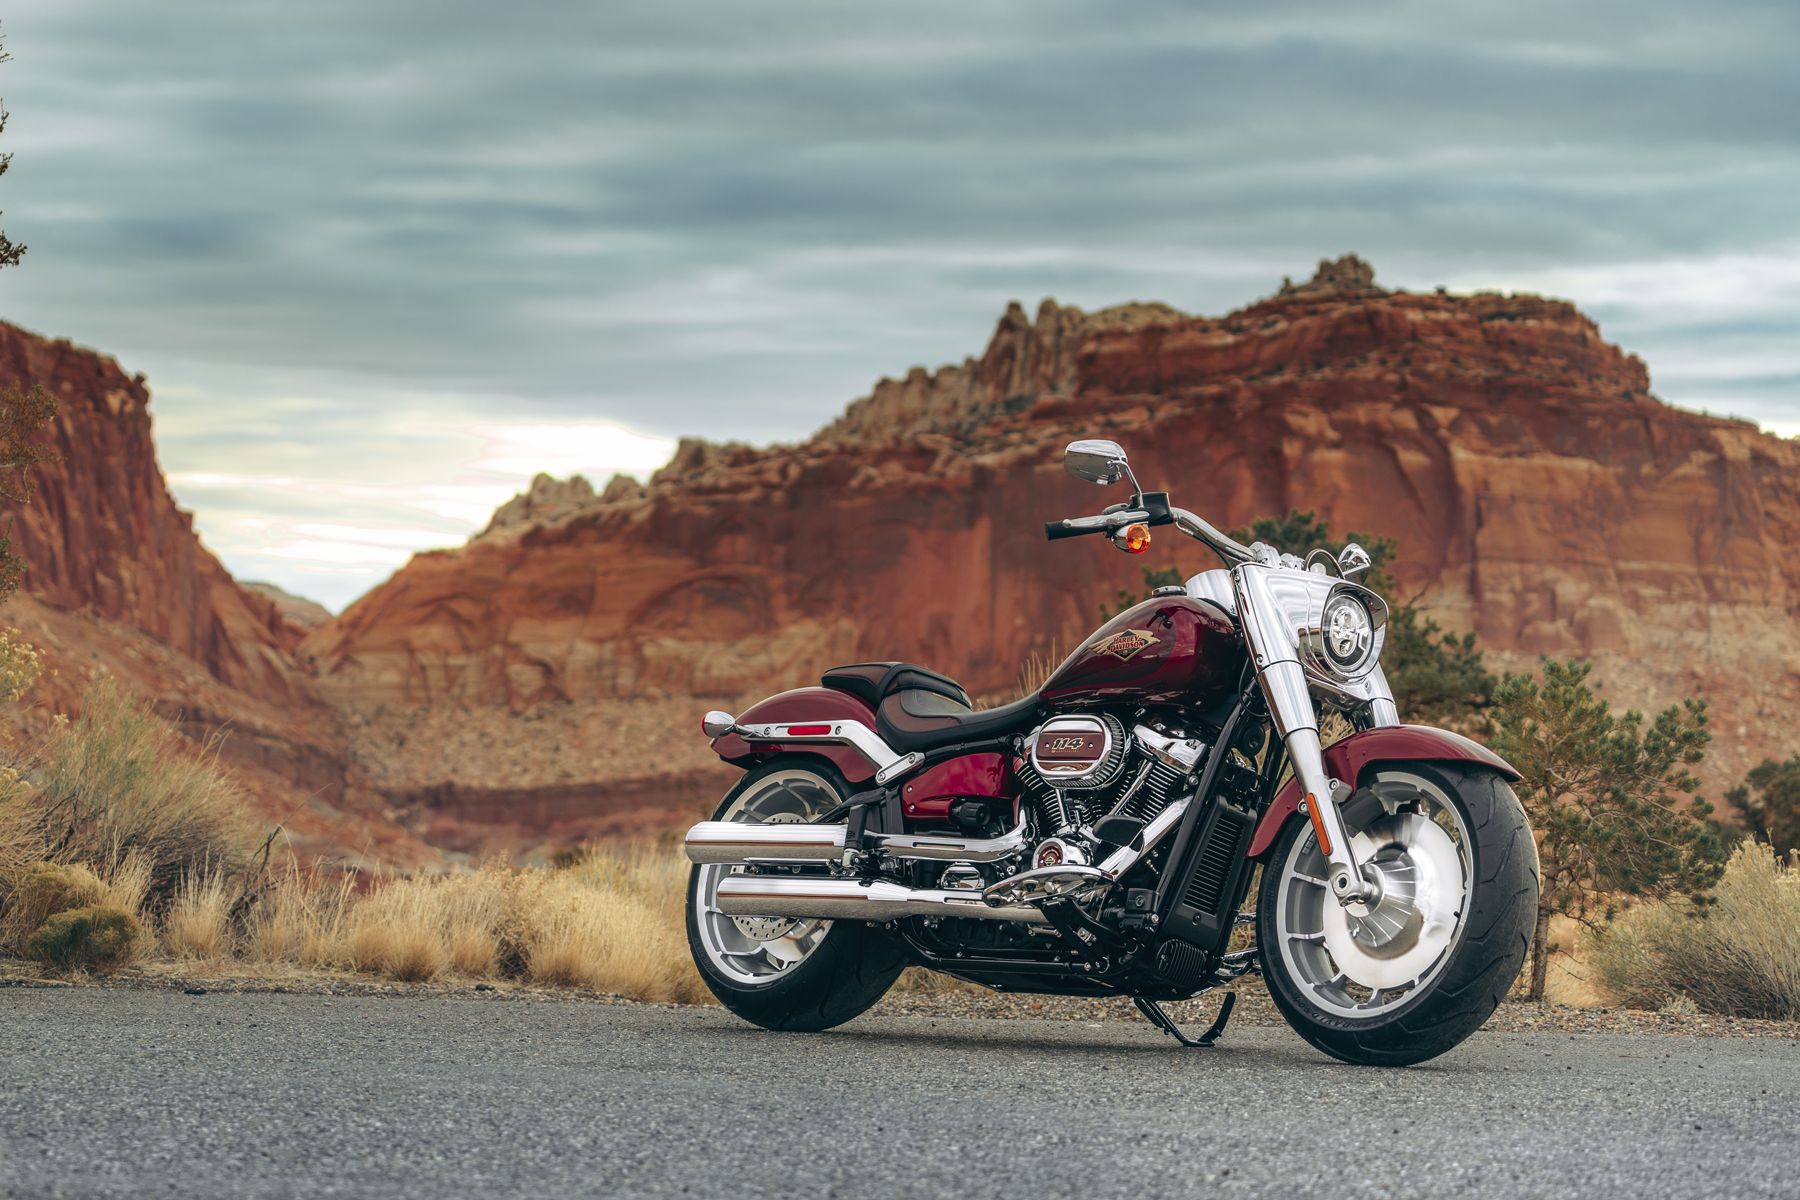 Harley-Davidson celebrates 120 years with new anniversary models